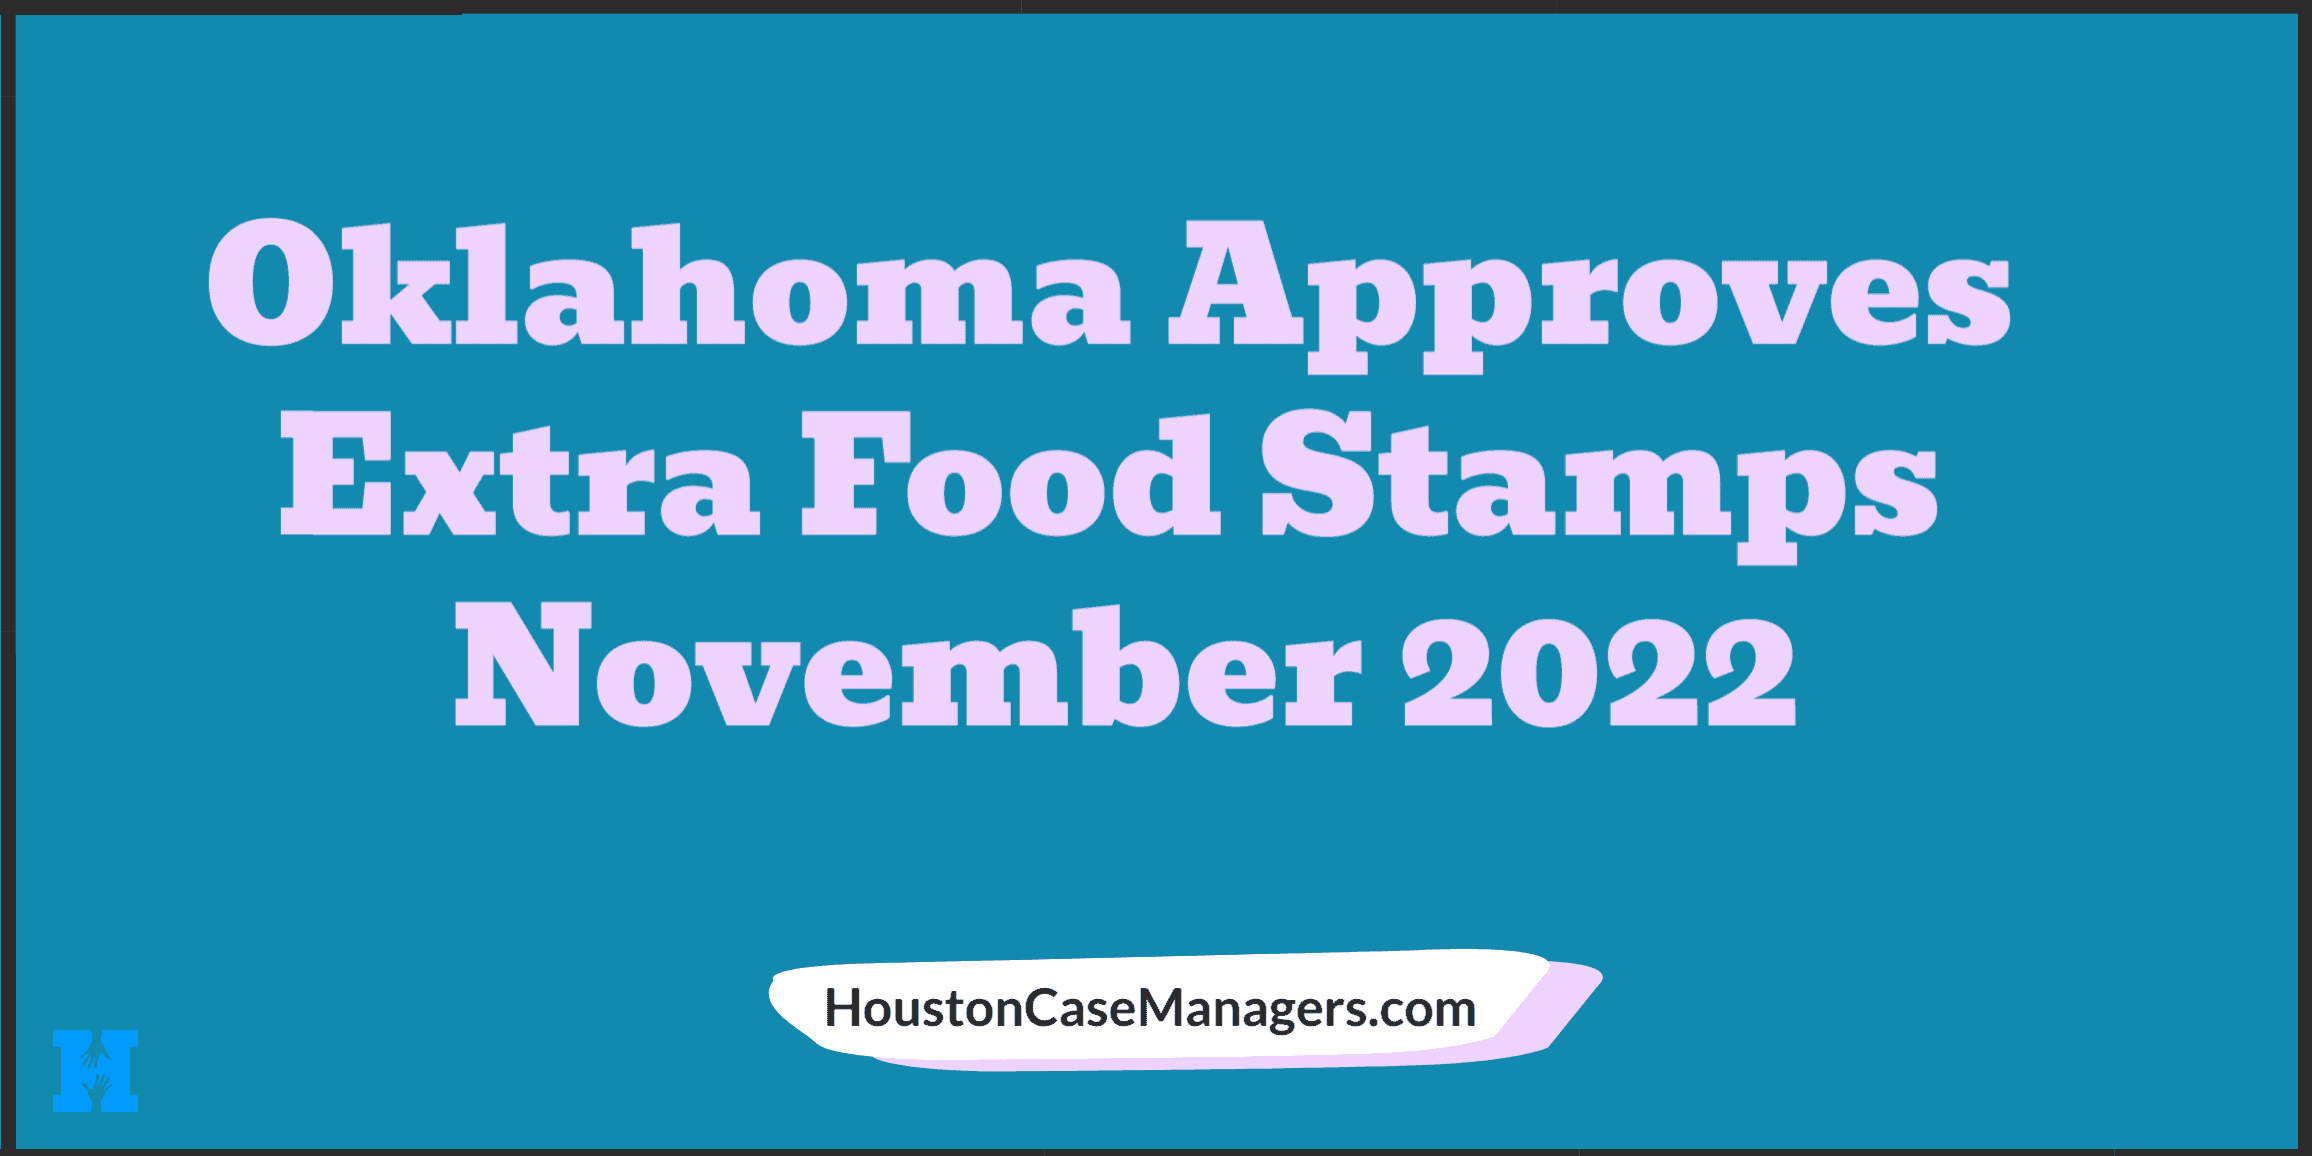 Is Oklahoma Giving Extra Food Stamps This Month? [November 2022]